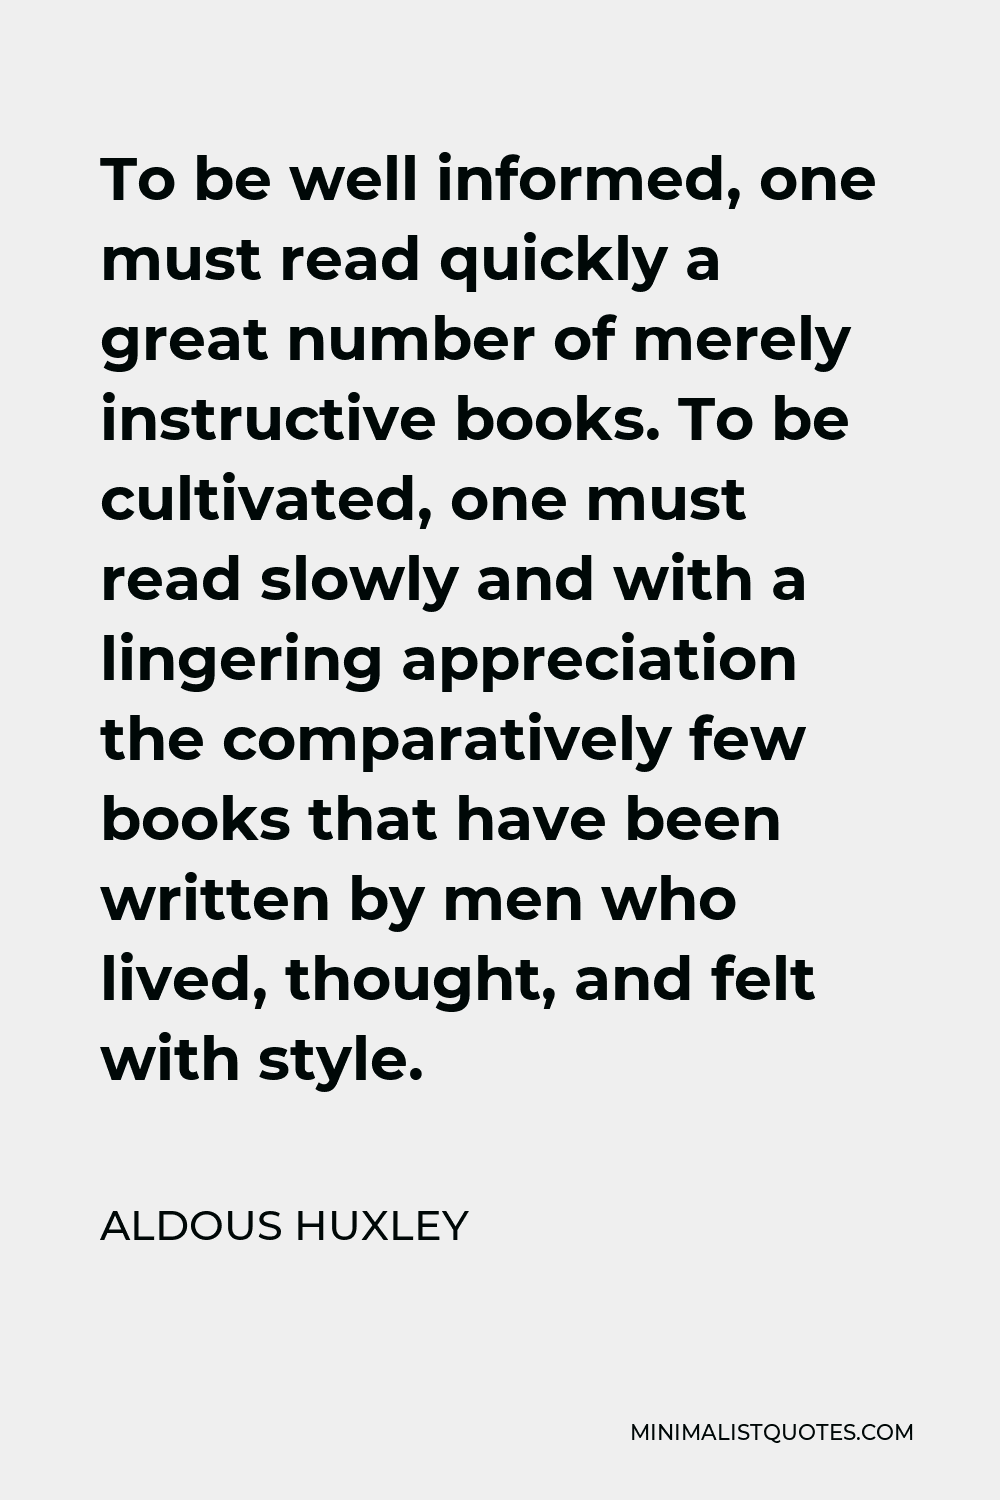 Aldous Huxley Quote - To be well informed, one must read quickly a great number of merely instructive books. To be cultivated, one must read slowly and with a lingering appreciation the comparatively few books that have been written by men who lived, thought, and felt with style.